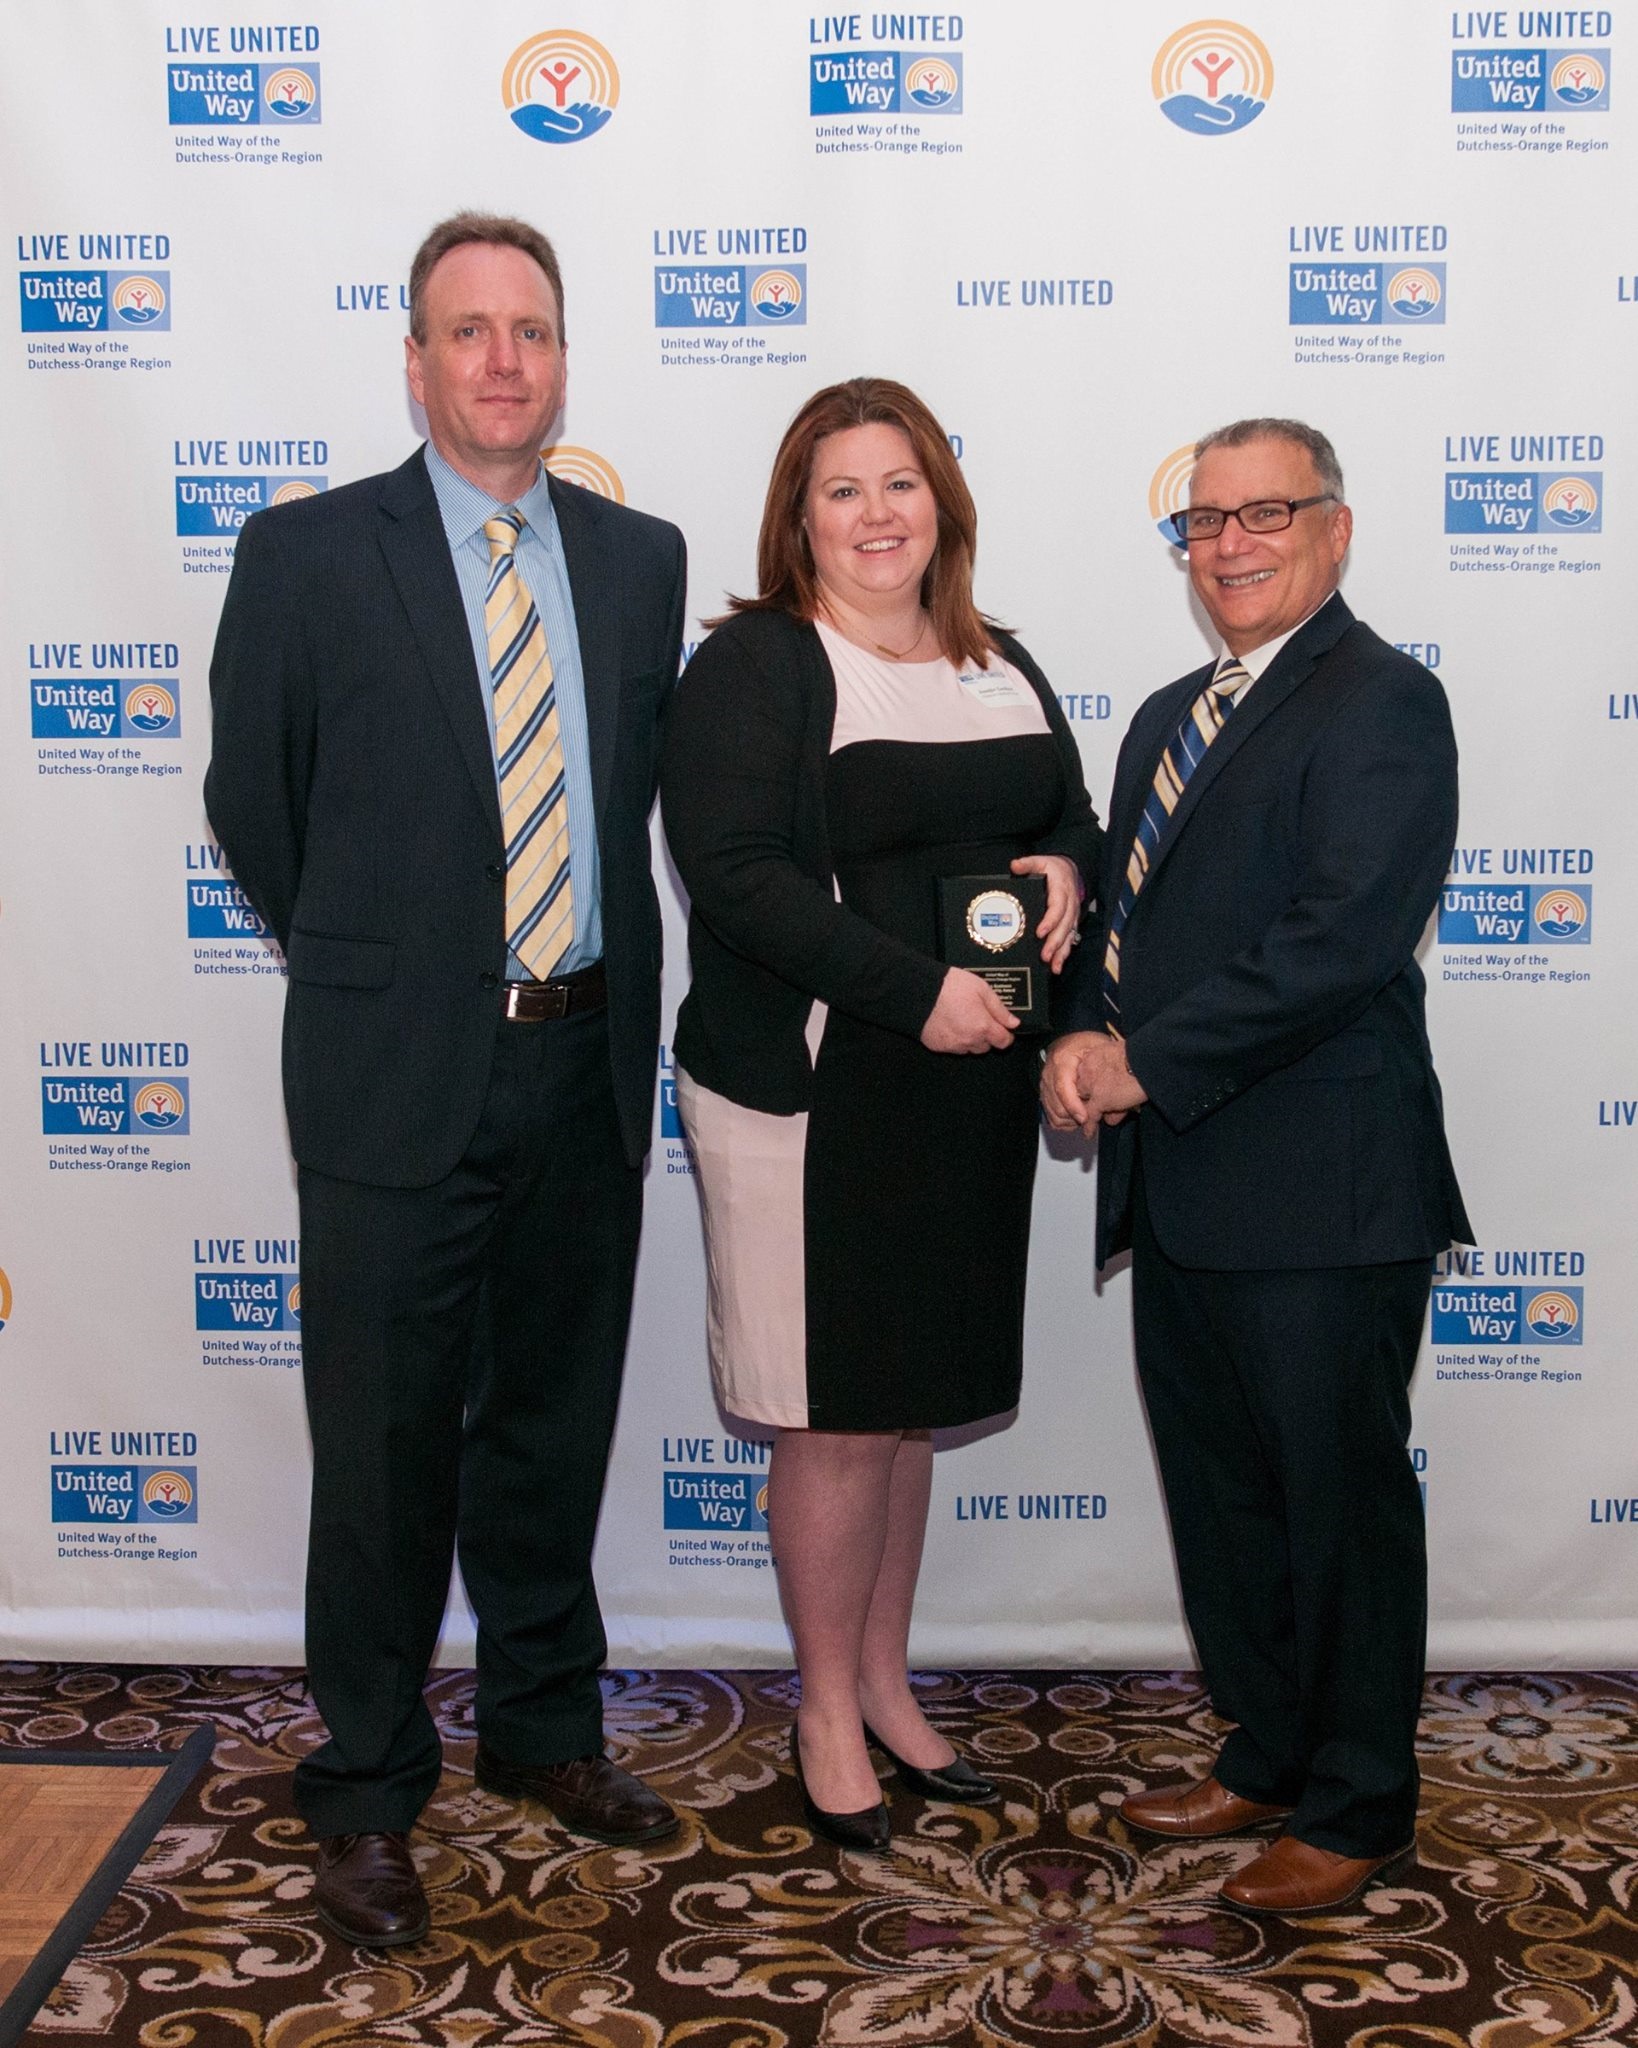 Jennifer Gardiner receives The Children's Medical Group's Business Leadership Award from UWDOR board vice chair Dave Jolly and board chair Barry Rothfeld at Celebration of Service: A Community United